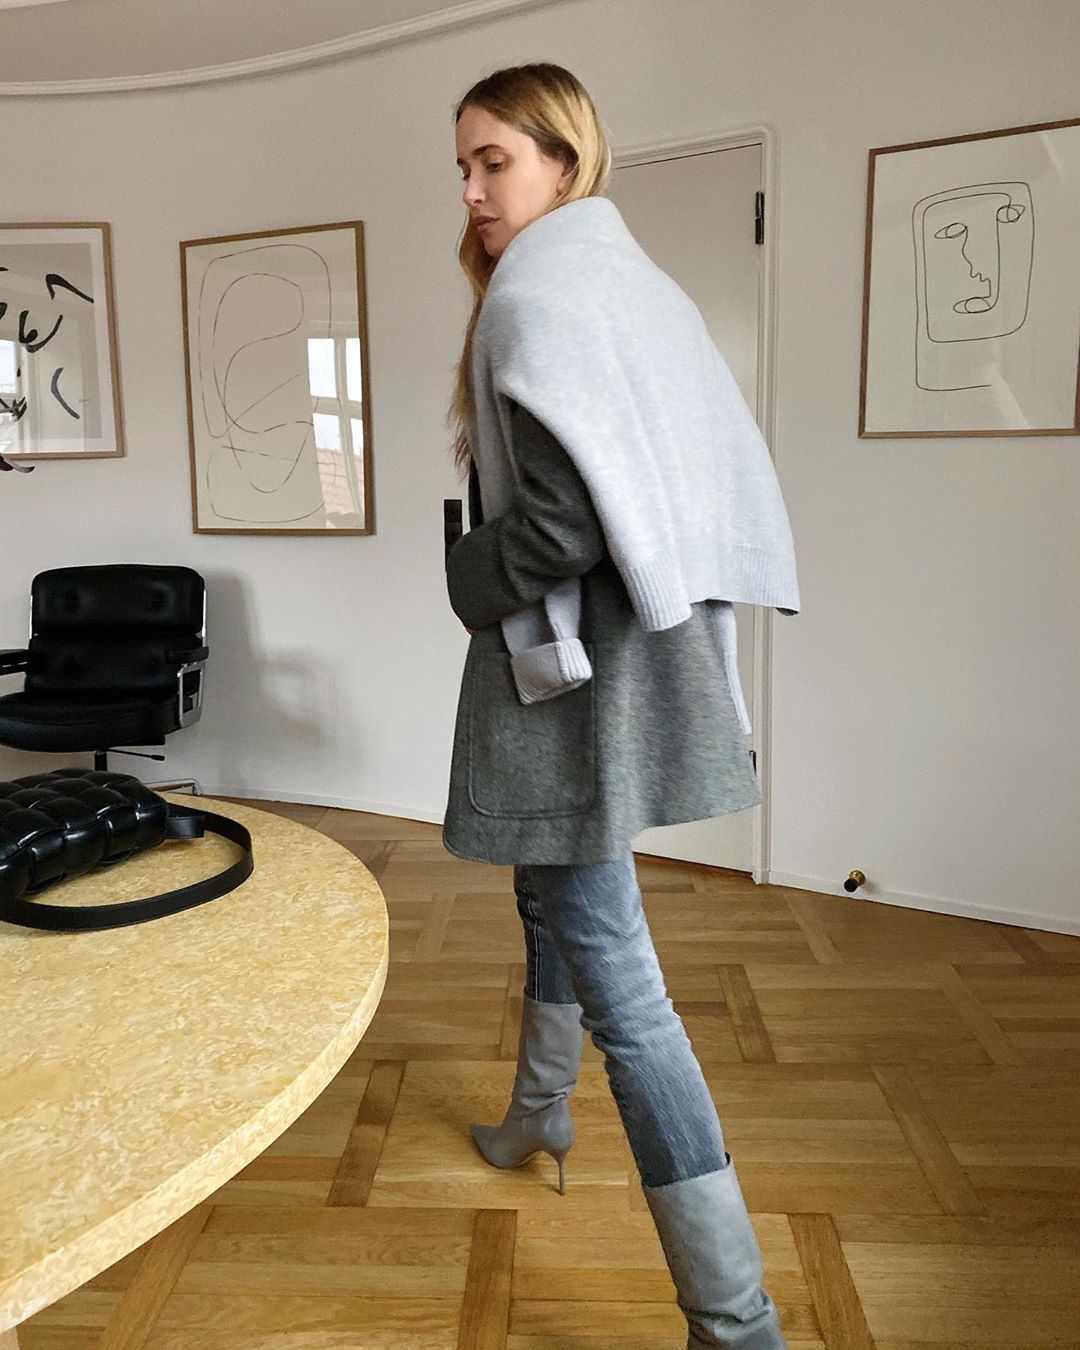 Jeans Outfit Ideas: @pernilleteisbaek wears grey jeans with matching boots